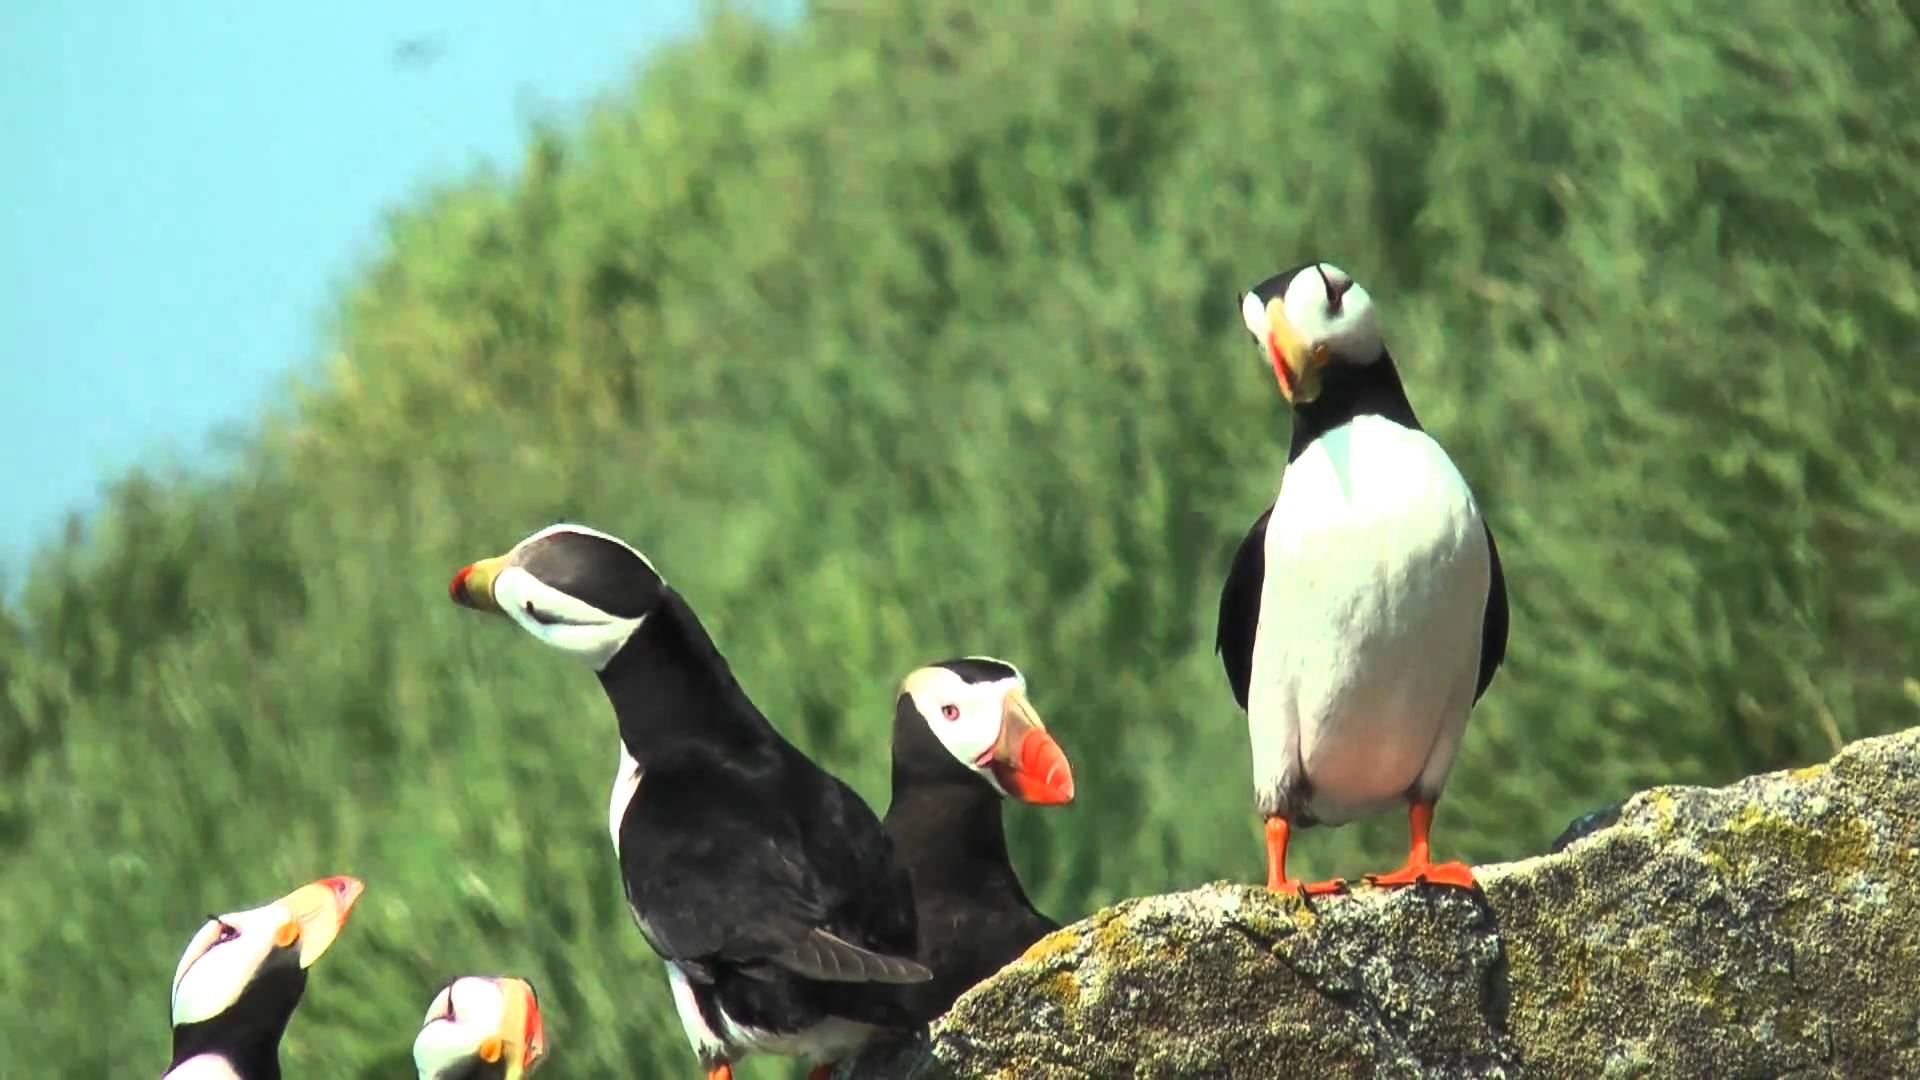 Horned puffin 2 FullHD JH1RNZ - YouTube